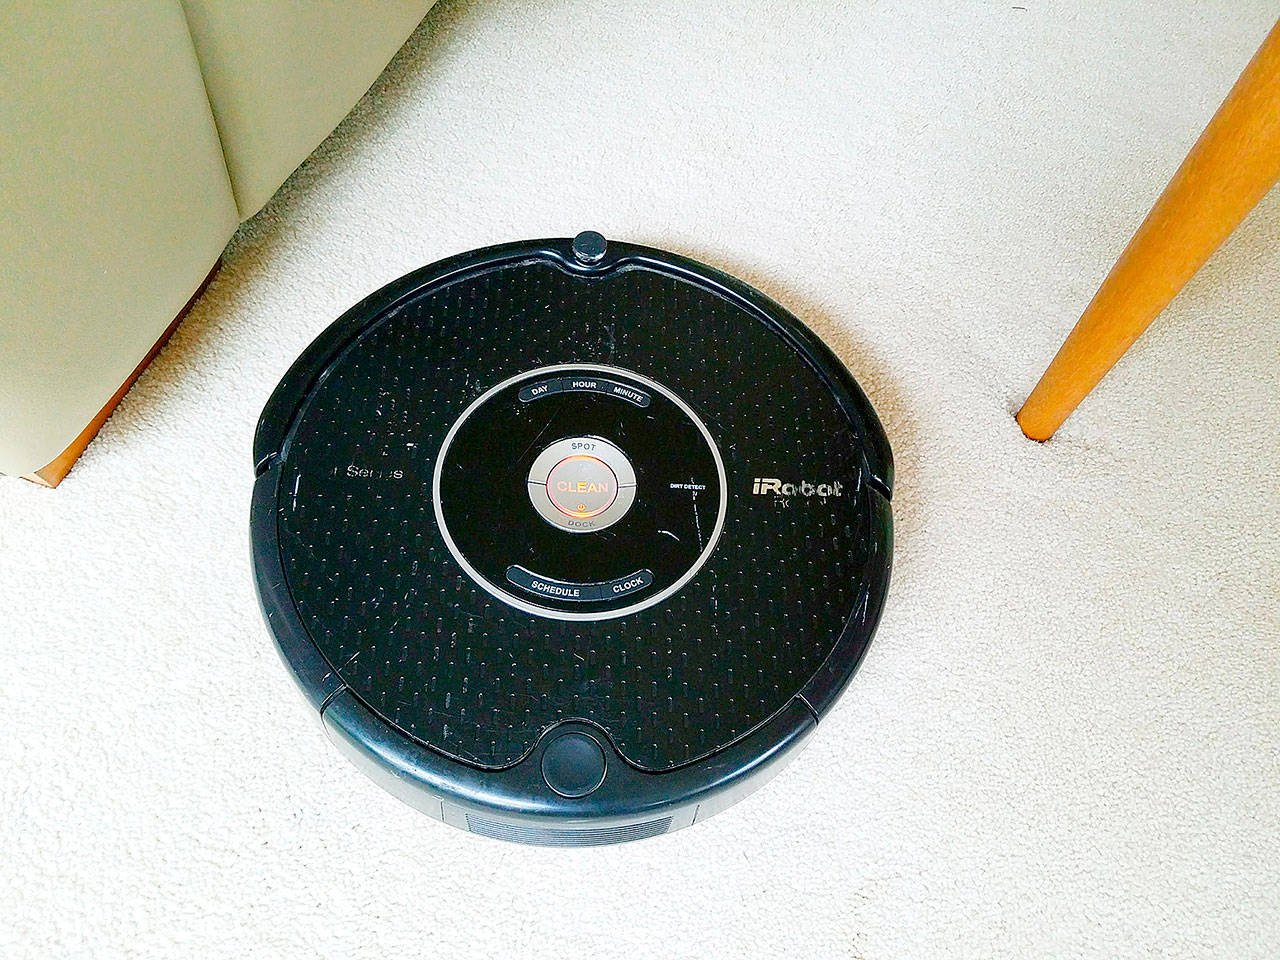 At the push of a button, Roomba sets forth to vacuum the living room. (Jennifer Bardsley)